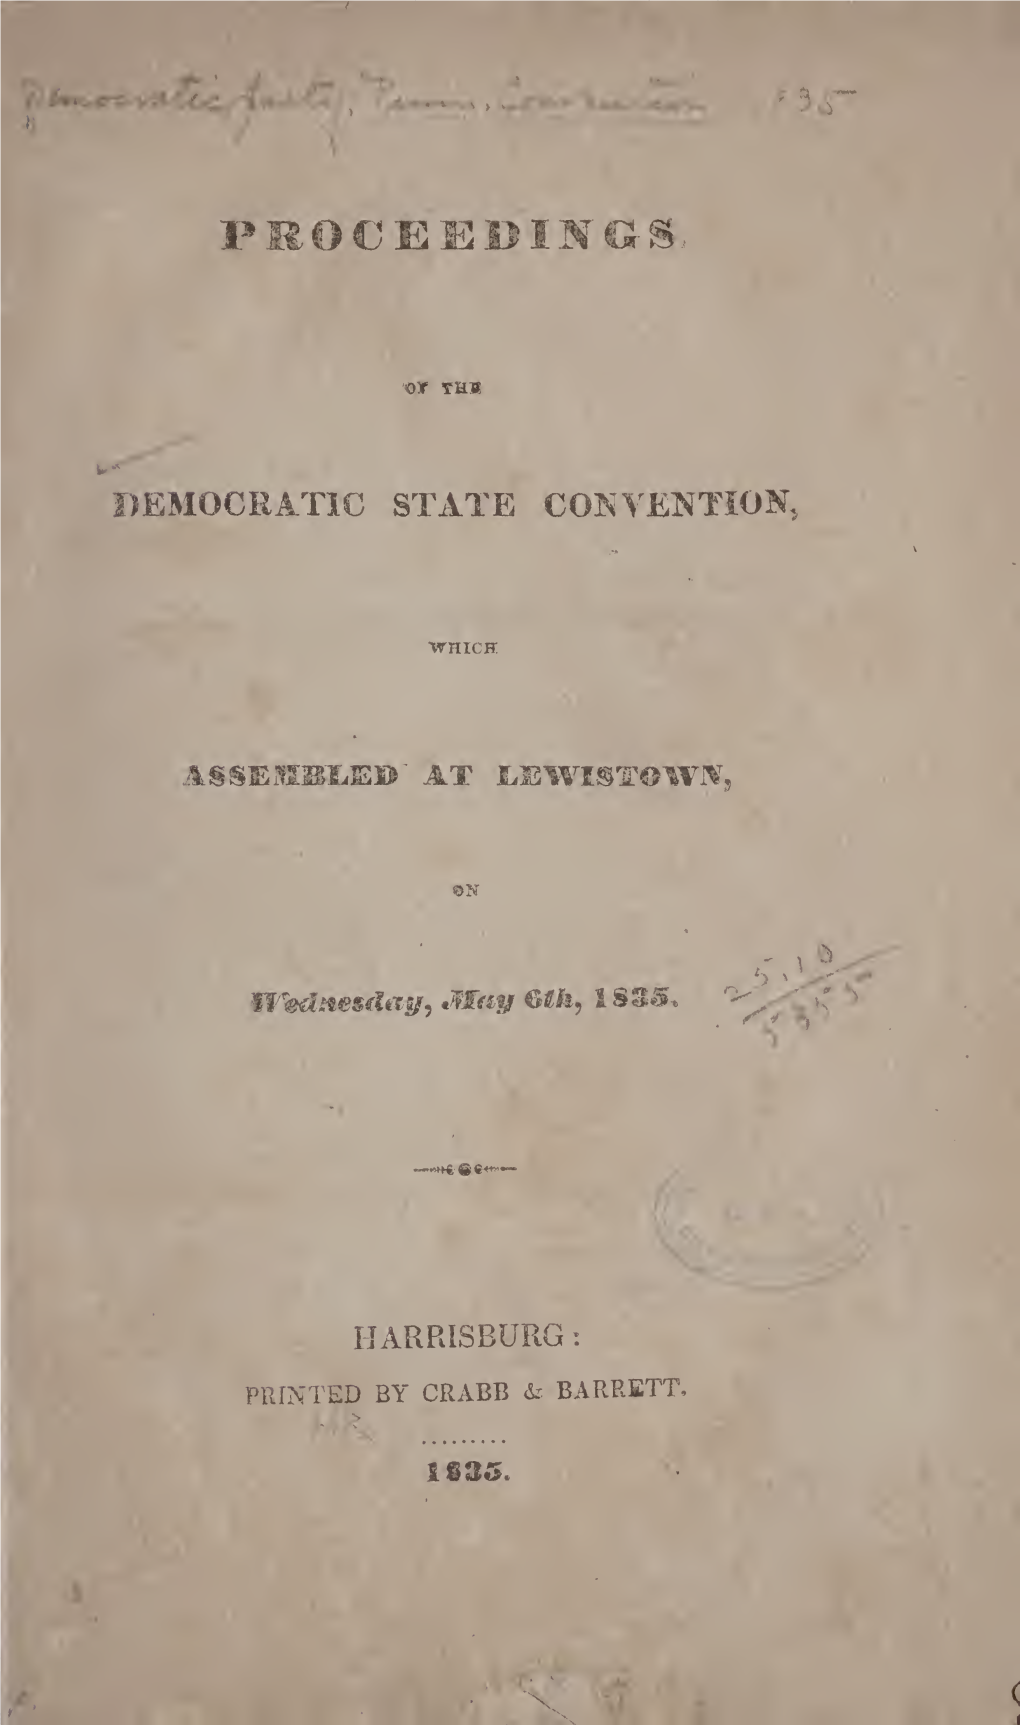 Proceedings of the Democratic State Convention